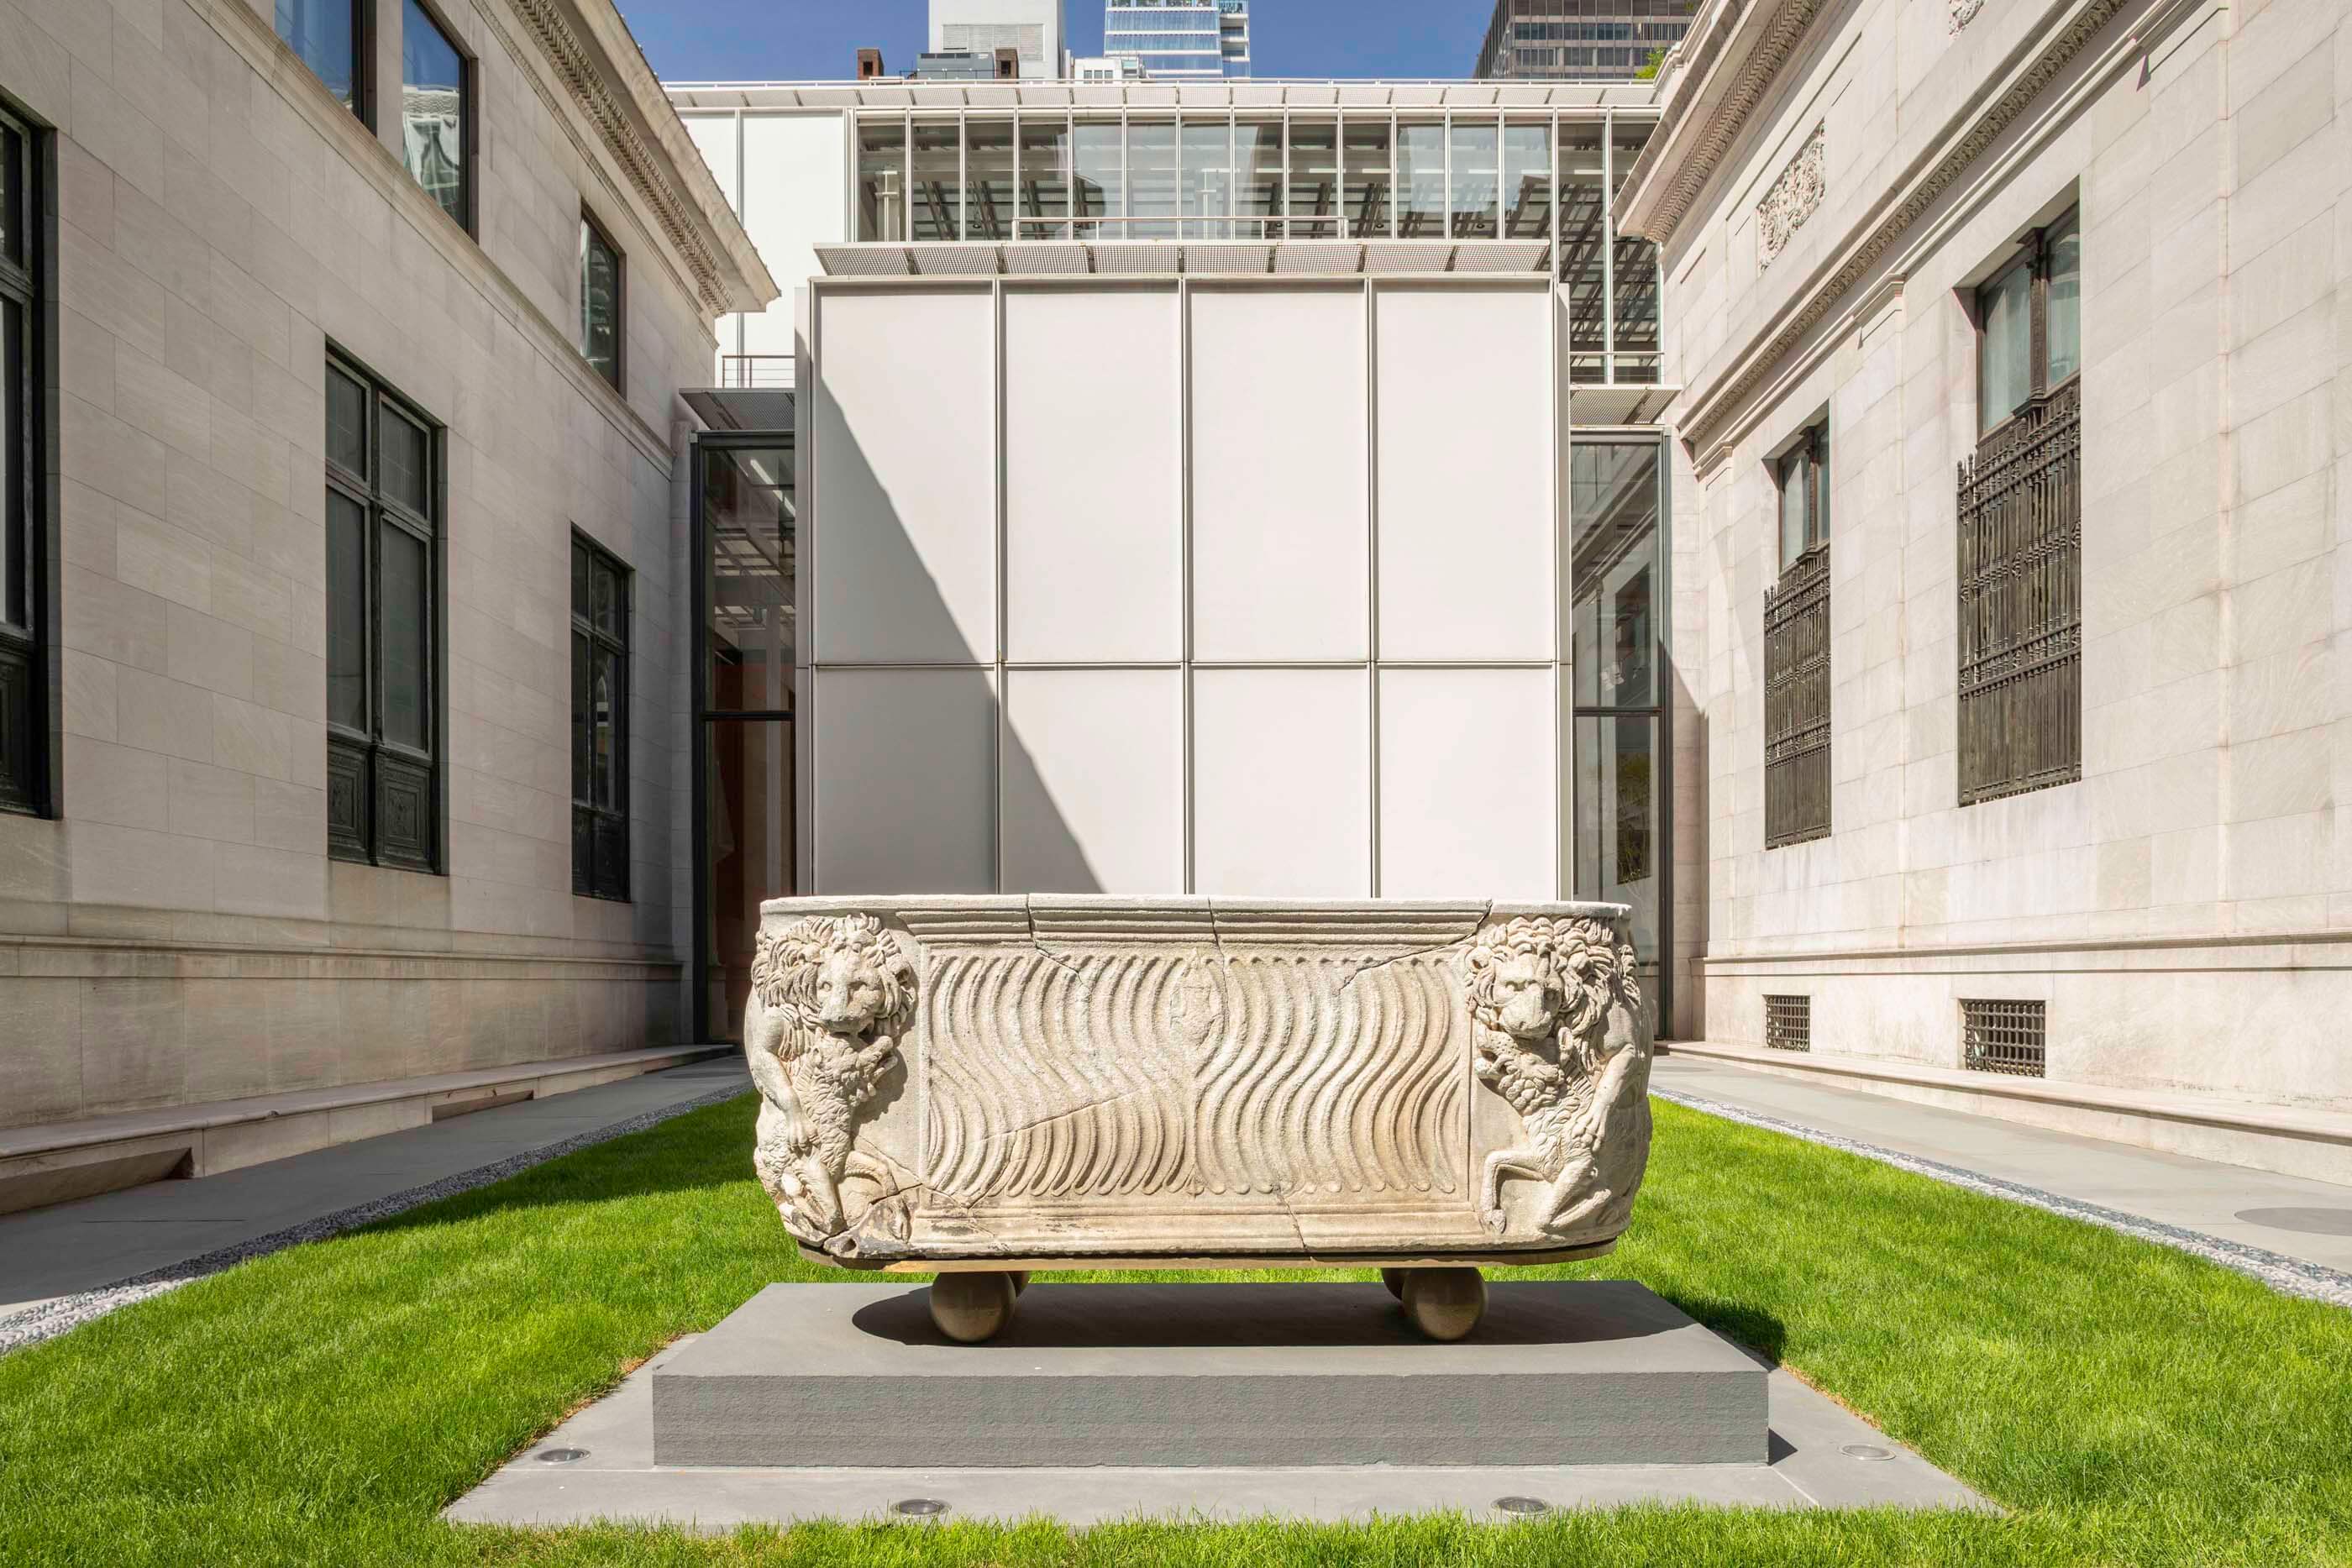 A roman sarcophagus on display in the new gardens